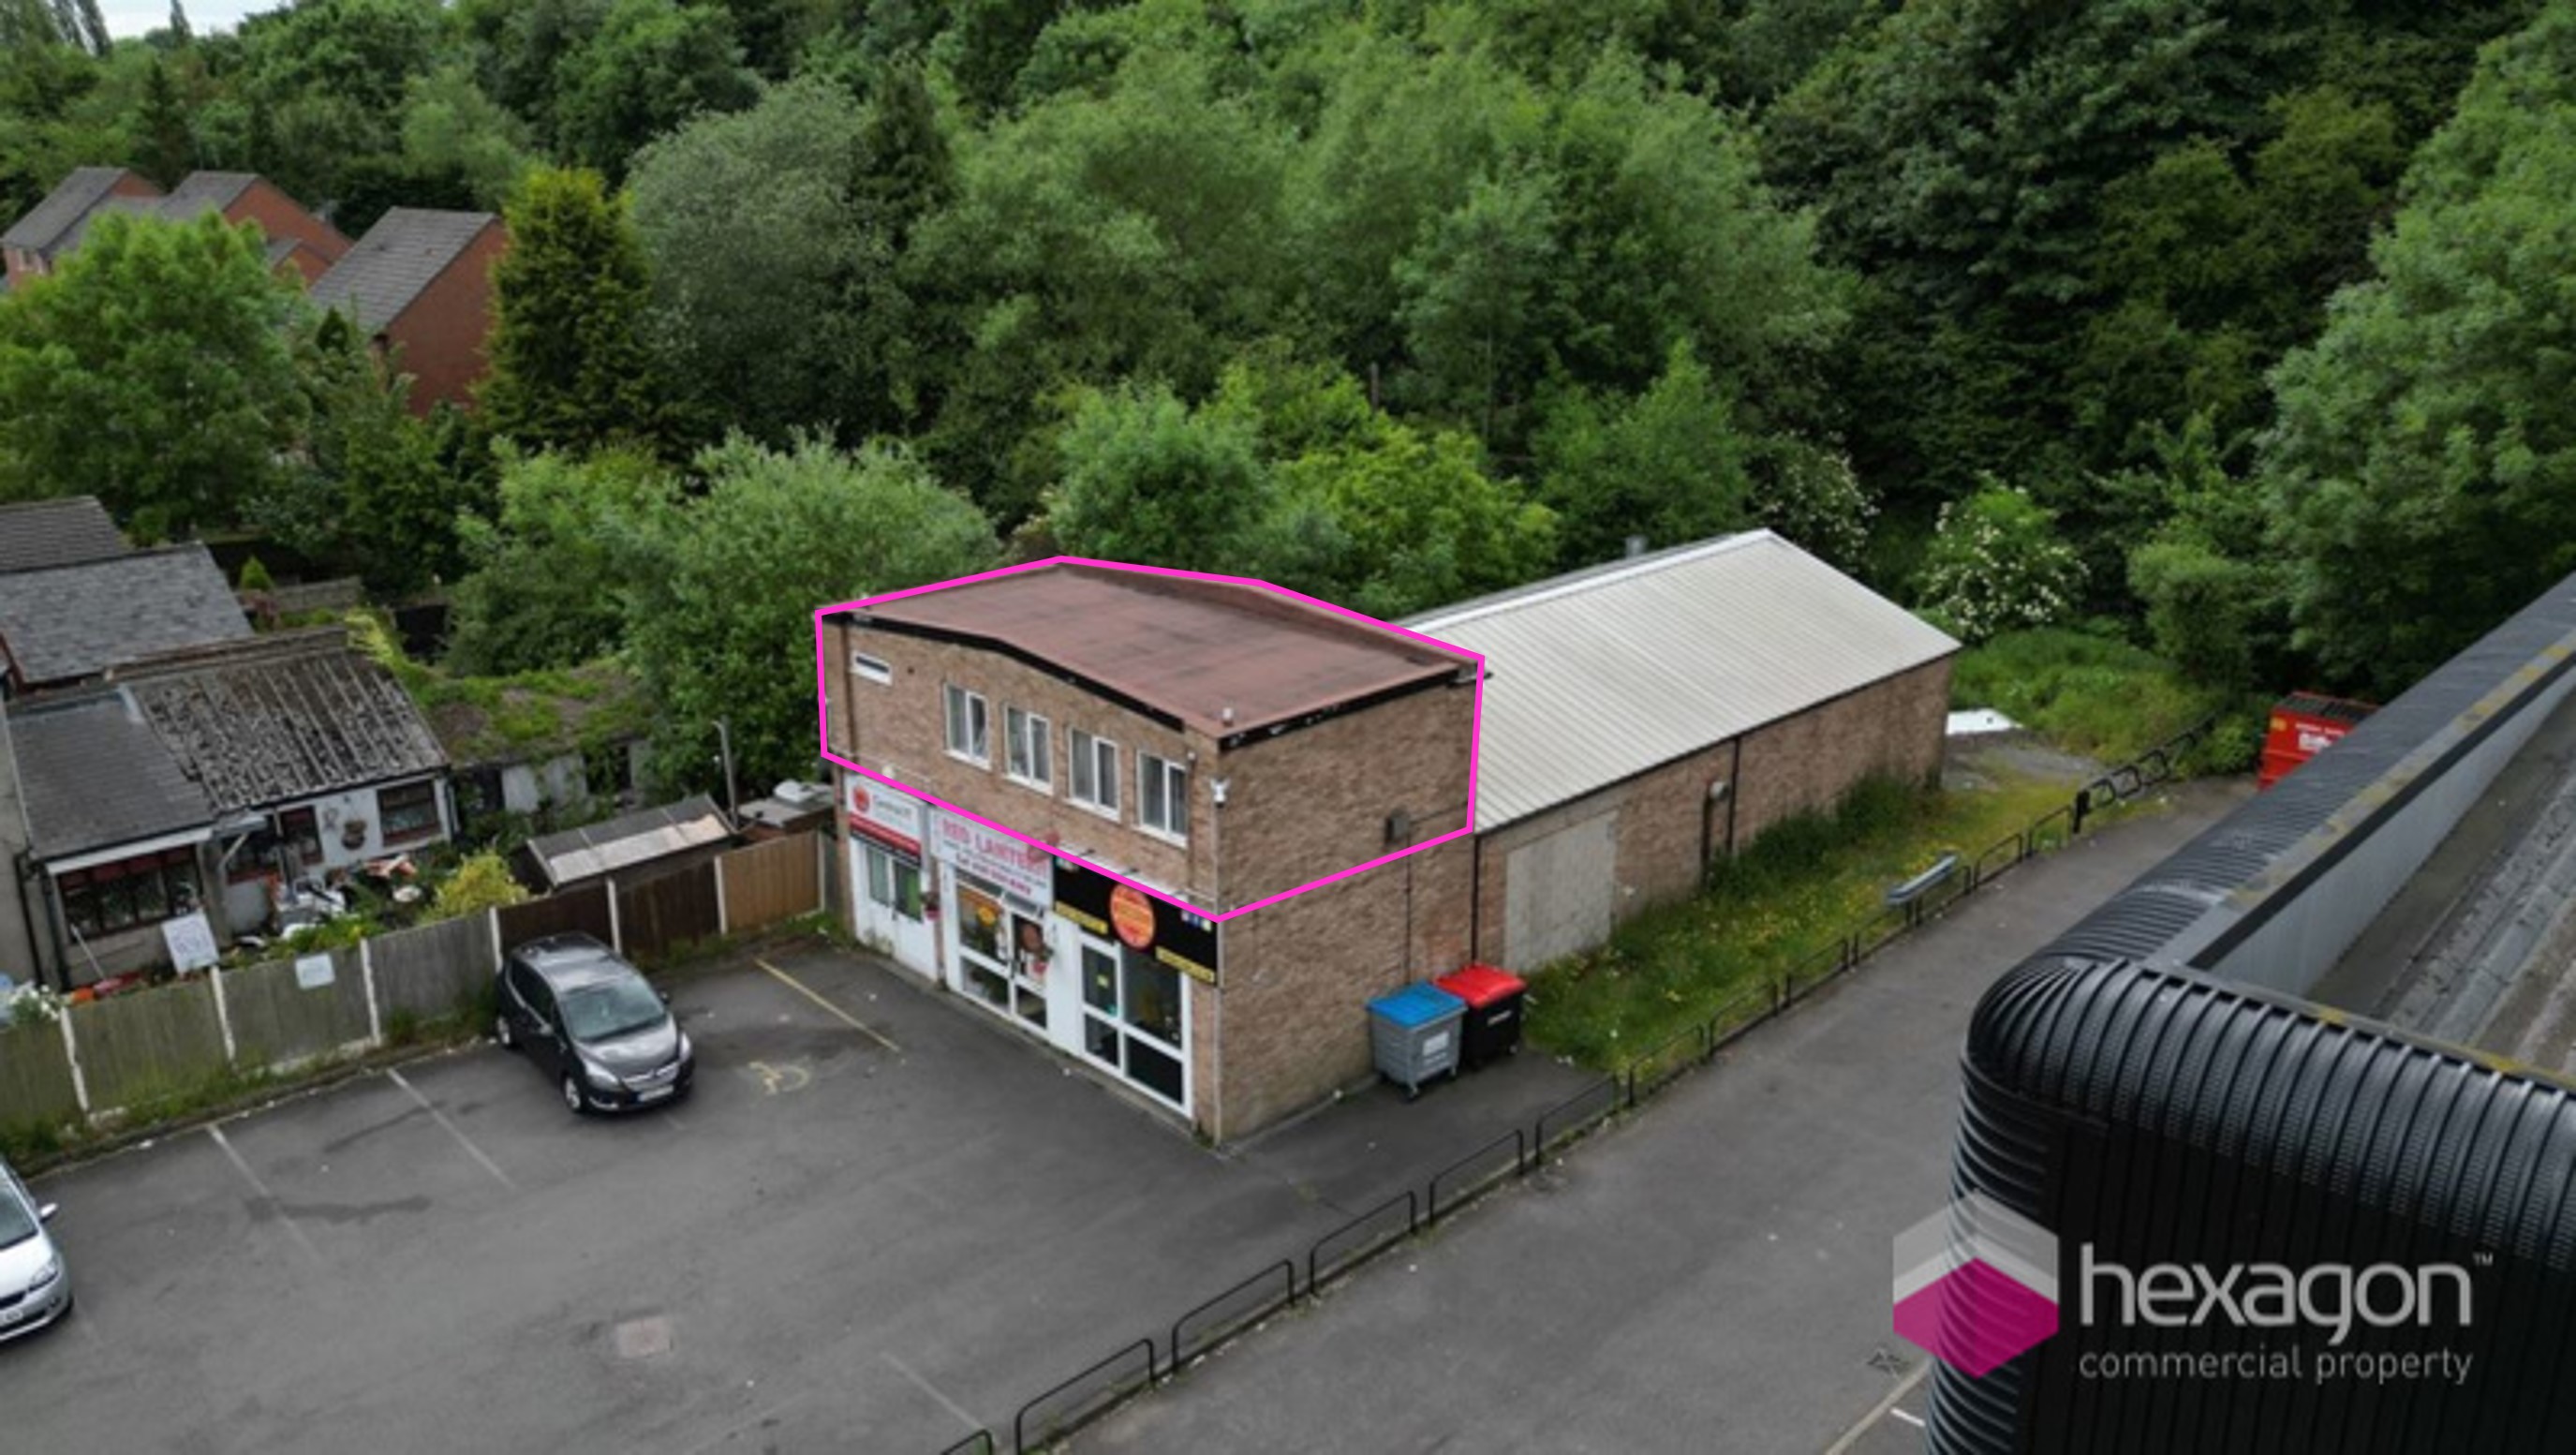 Office for rent in Halesowen. From Hexagon Commercial Property